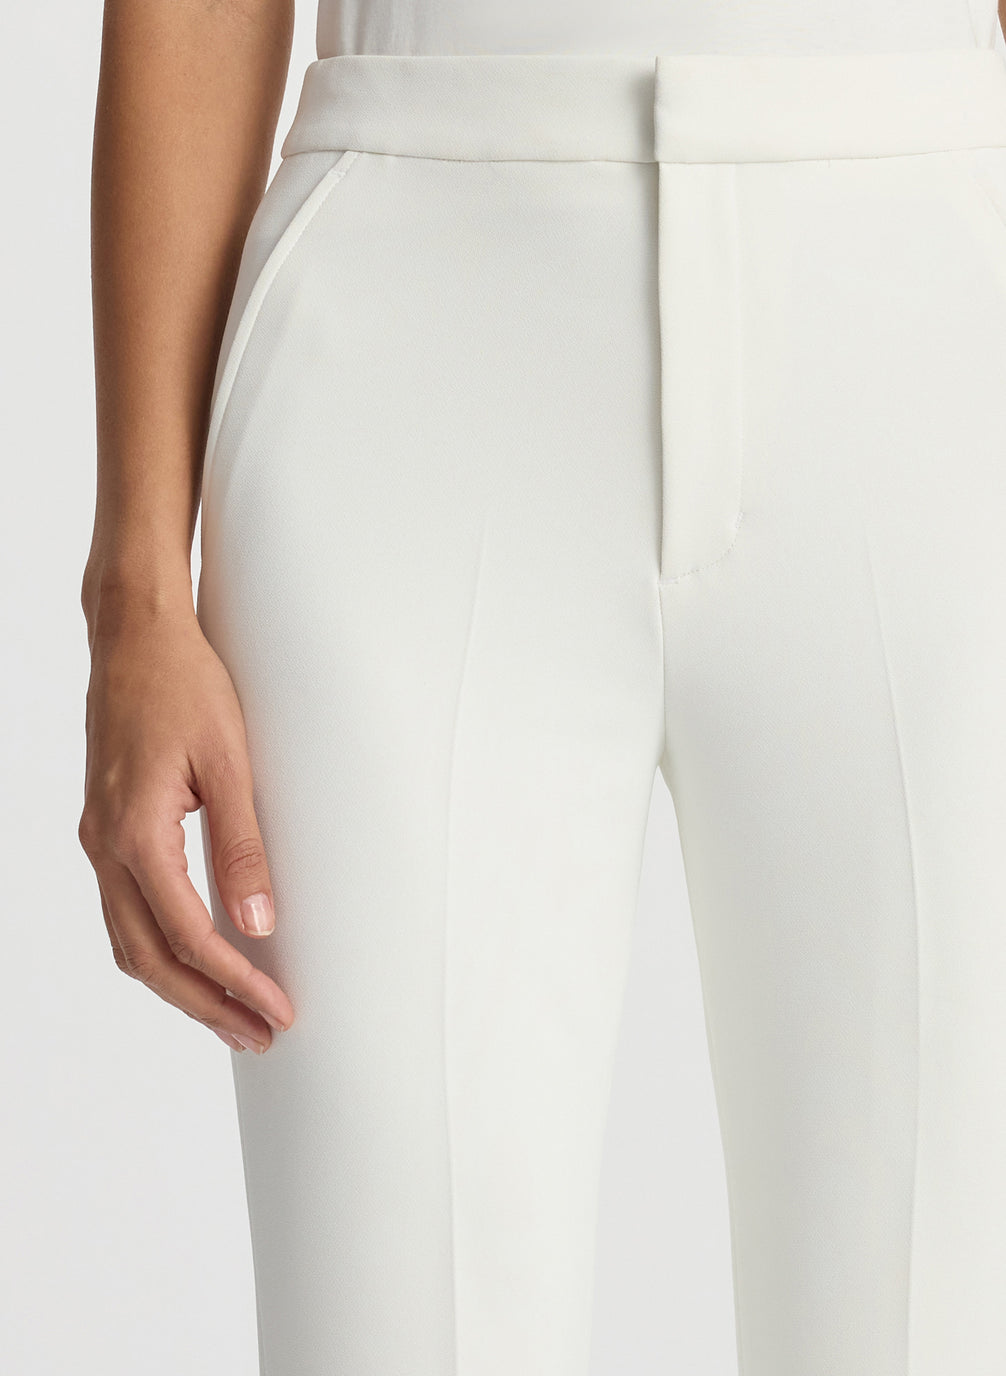 detail view of woman wearing white sleeveless shirt and white flared pants